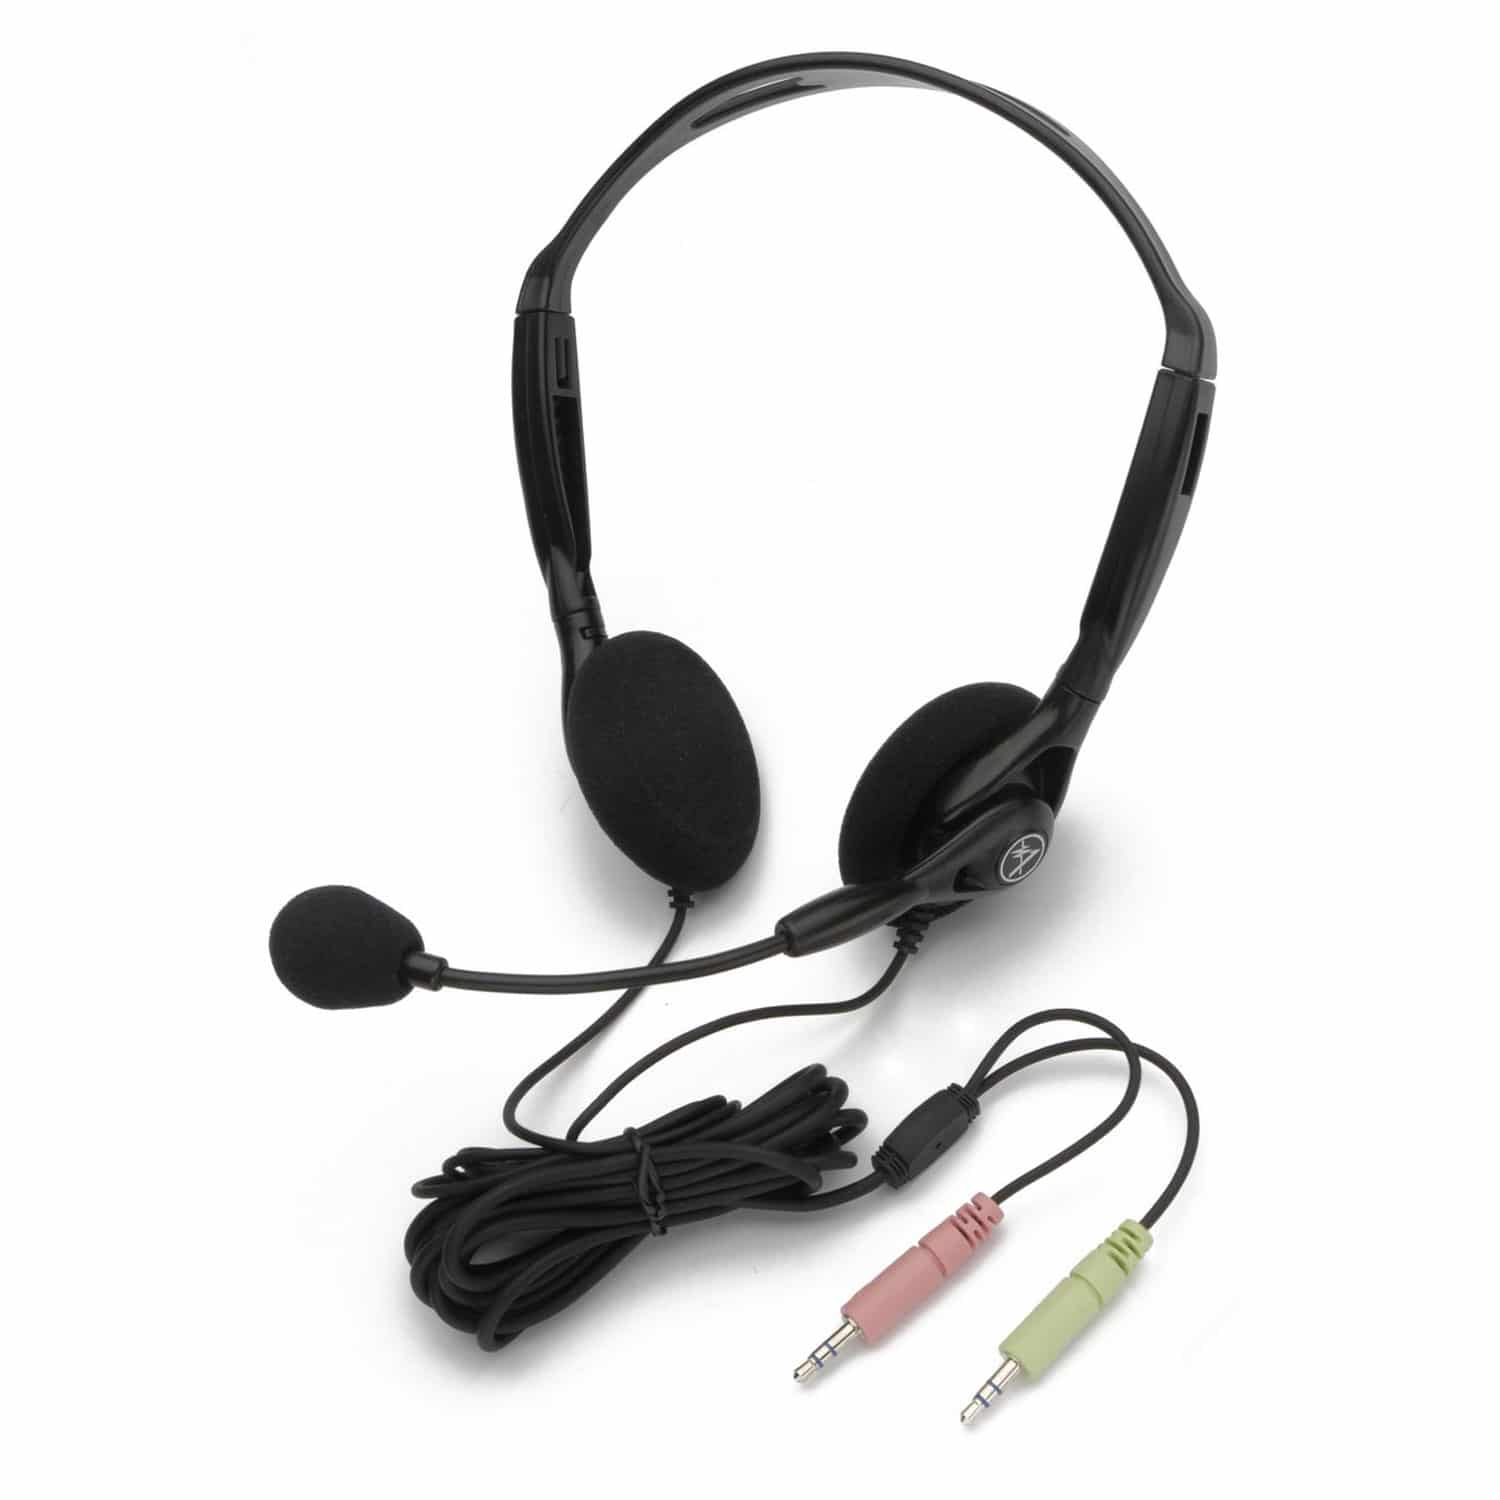 Andrea Communications C1-1023200-1 Model NC-125 Noise Canceling Stereo Headset With Dual 3.5mm Plugs 